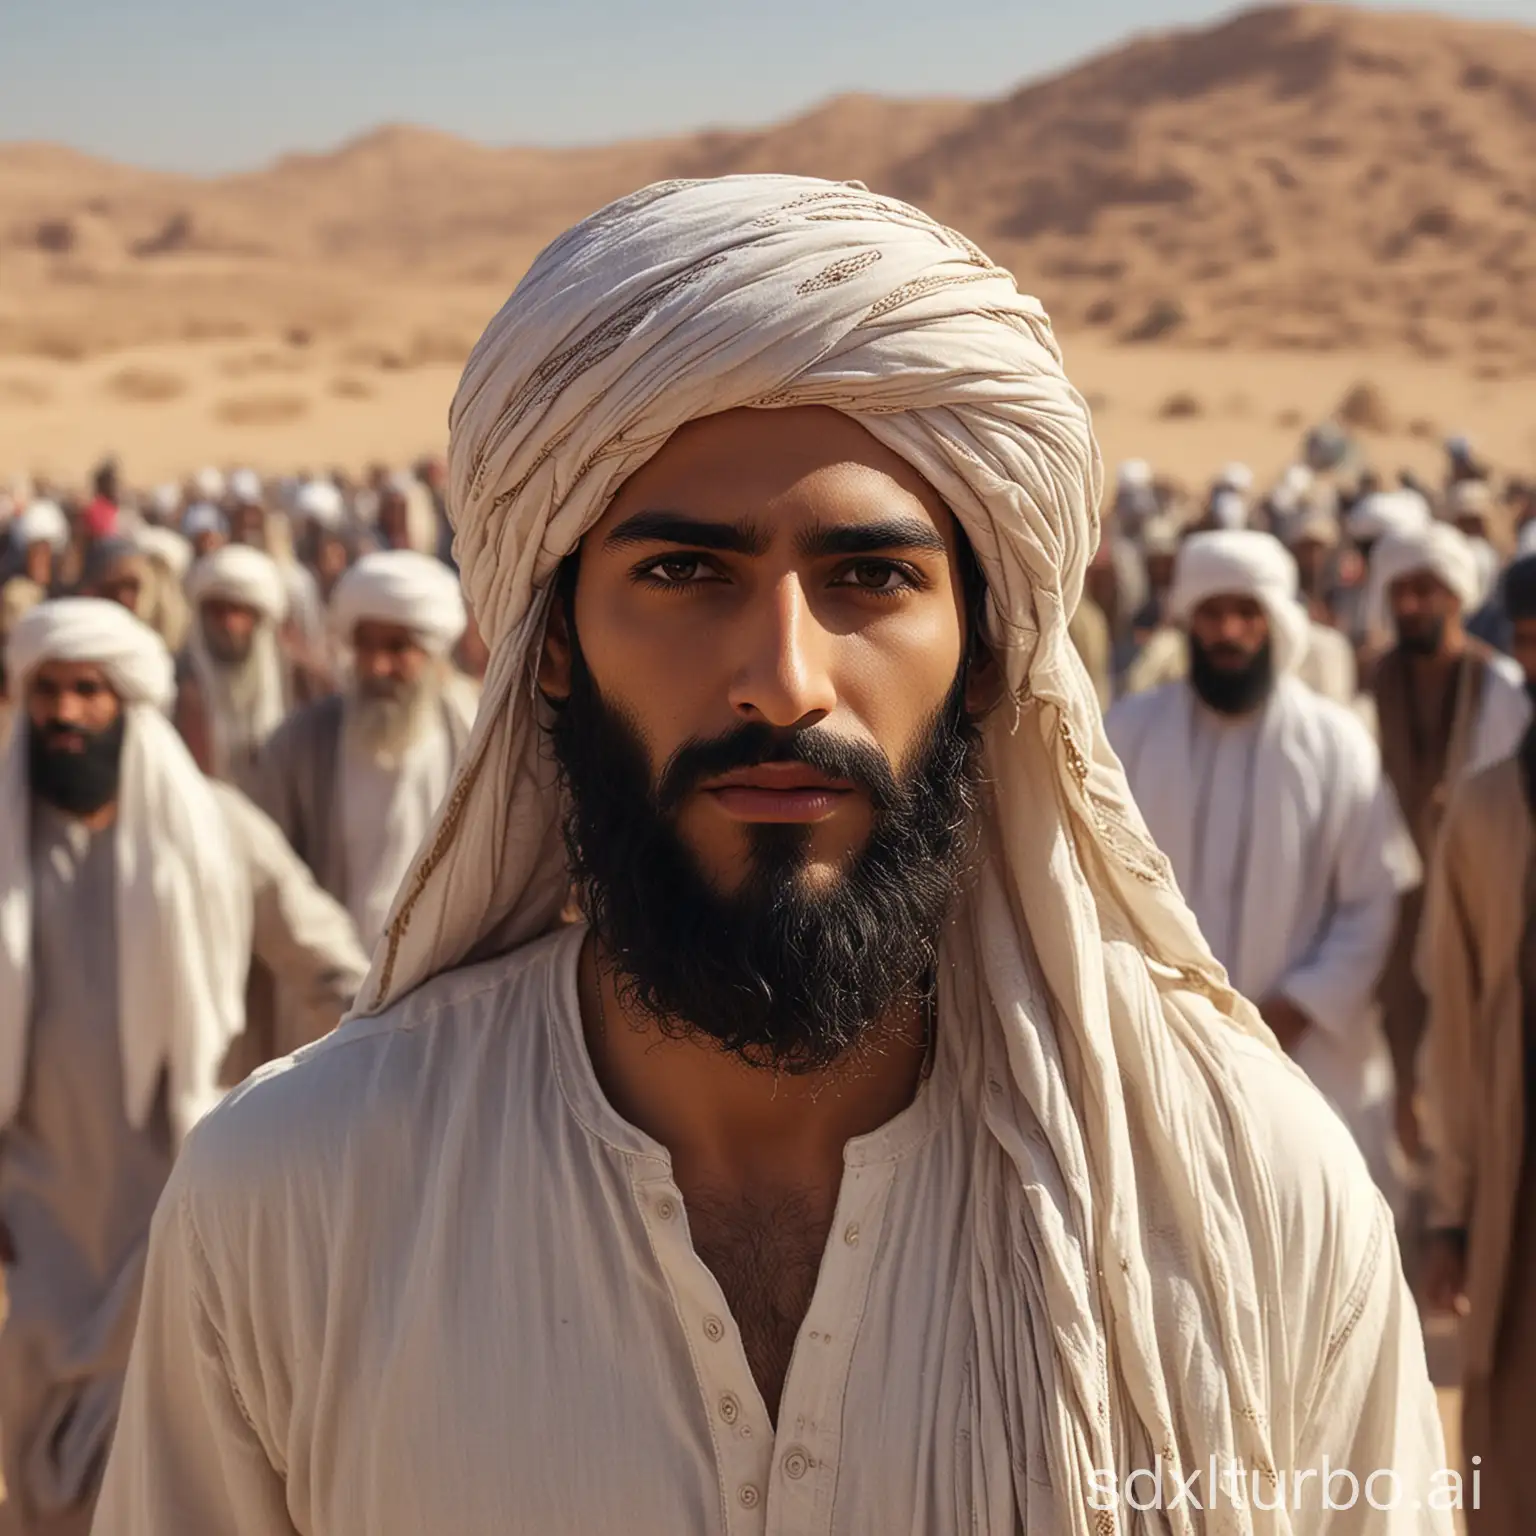 Create a realistic image of an arab man wearing arab clothing. tall, slender body, long wavy shoulder length hair. wearing a turban, a thick and long beard, standing in the middle of a crowd of people fighting in the desert. High quality images, Uhd,HD,